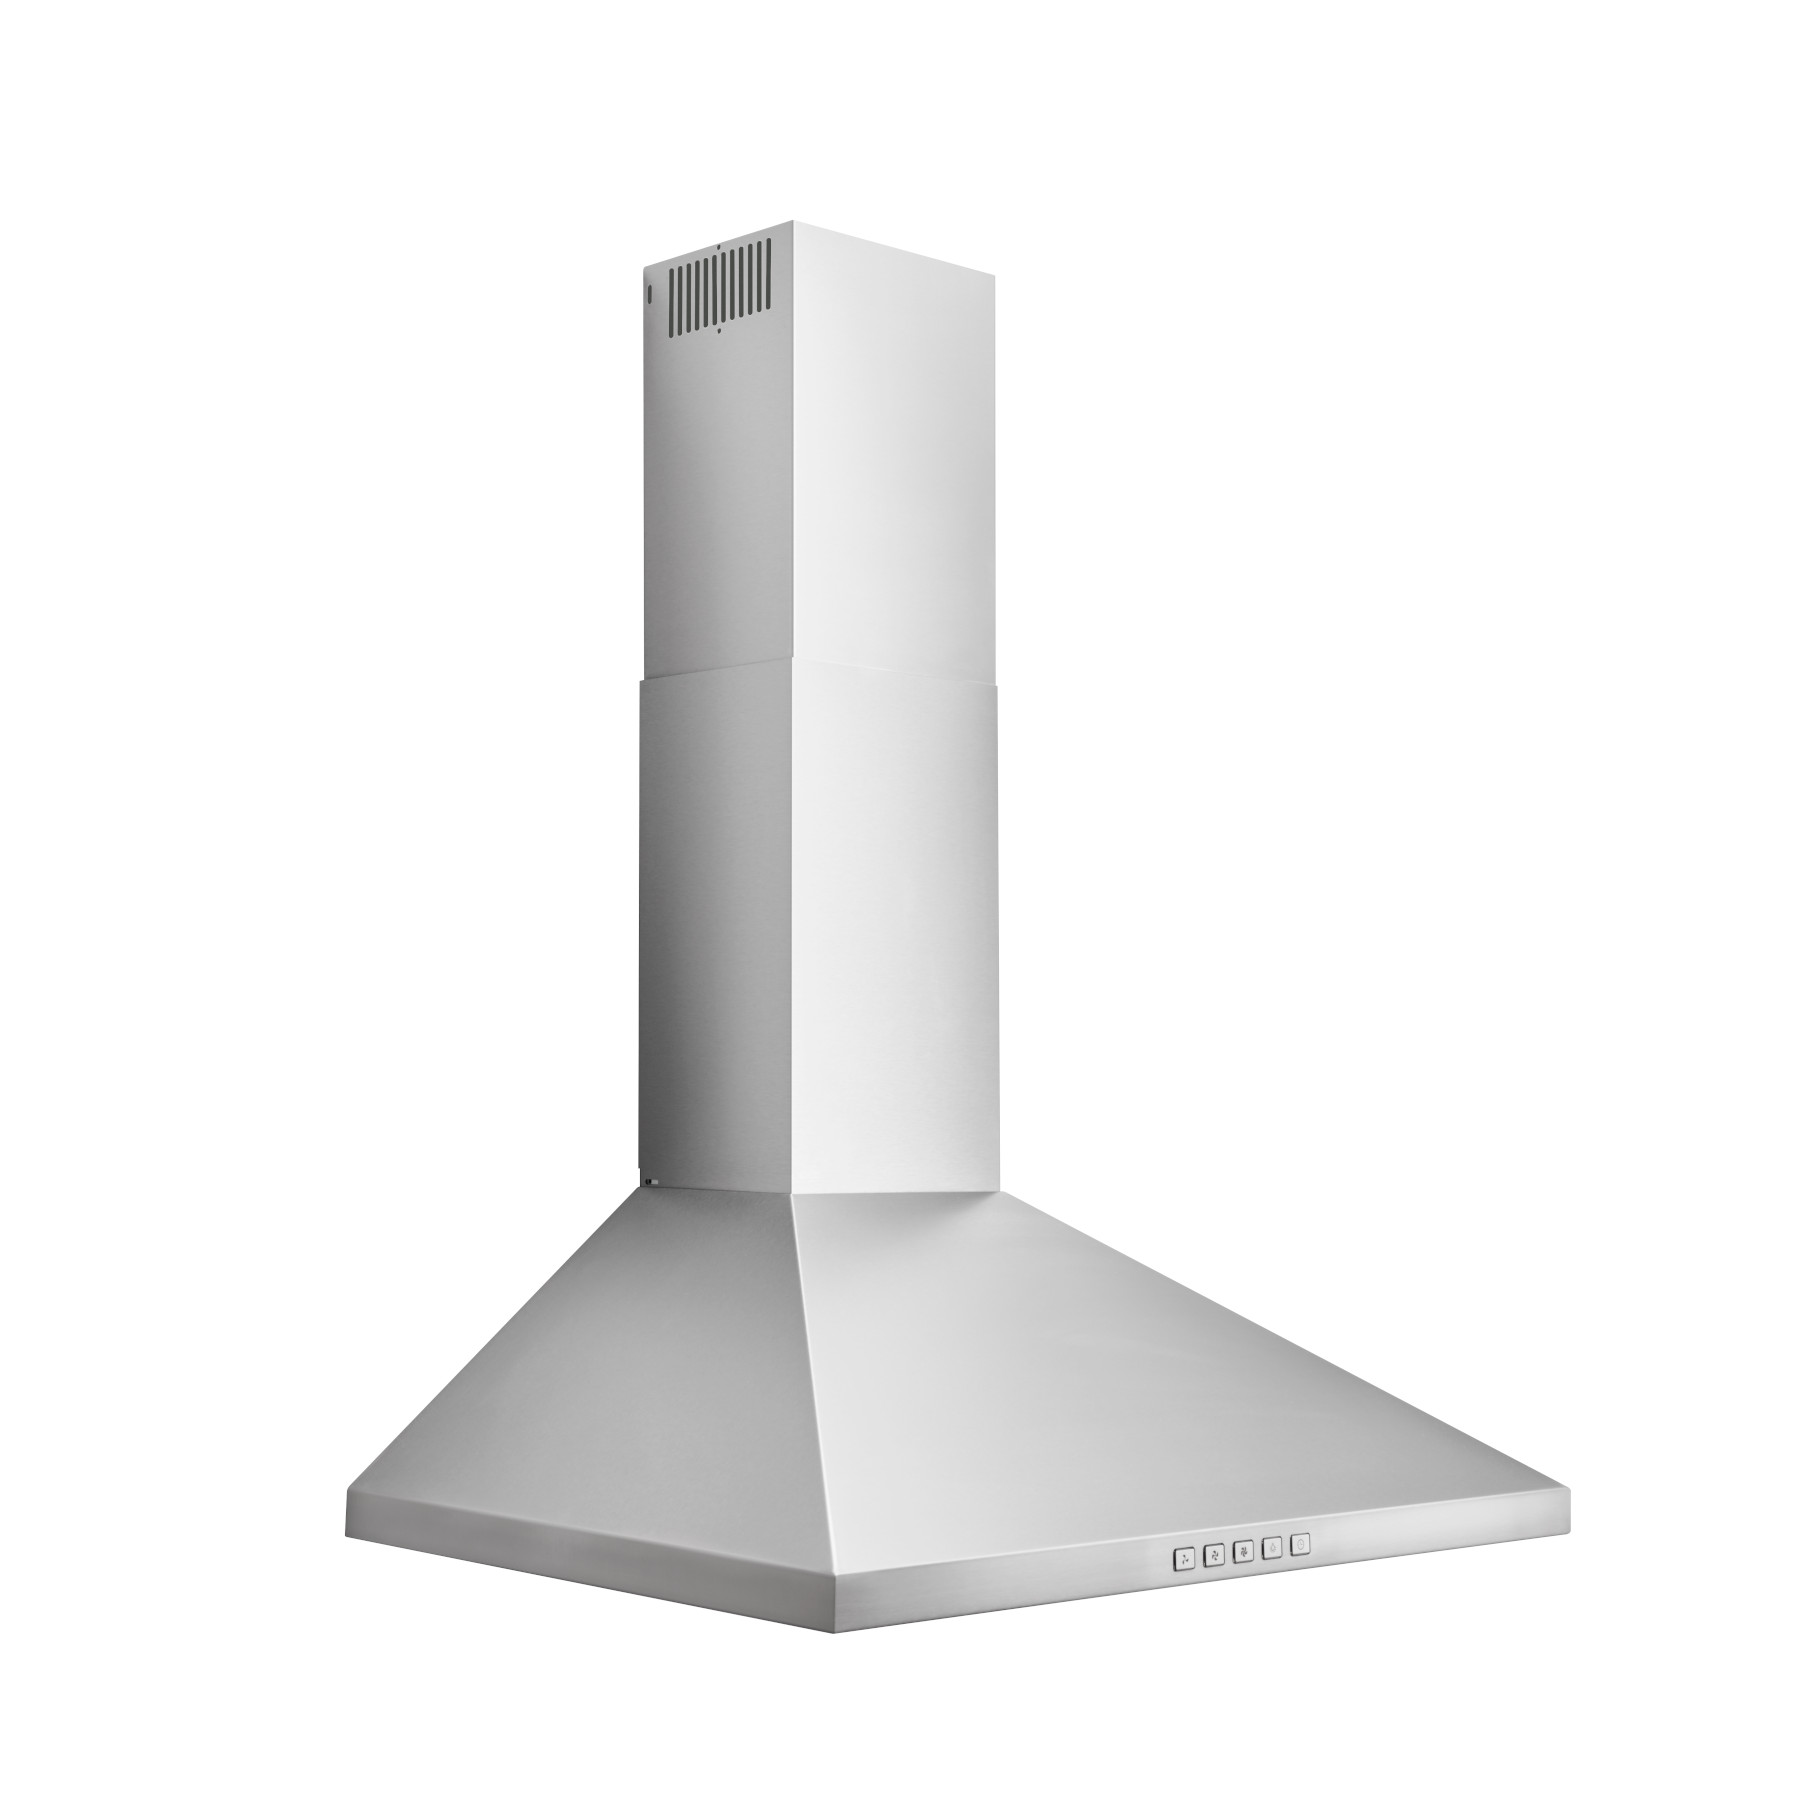 **DISCONTINUED** Broan® 30-Inch Convertible Wall-Mount Pyramidal Chimney Range Hood, 450 MAX CFM, Stainless Steel